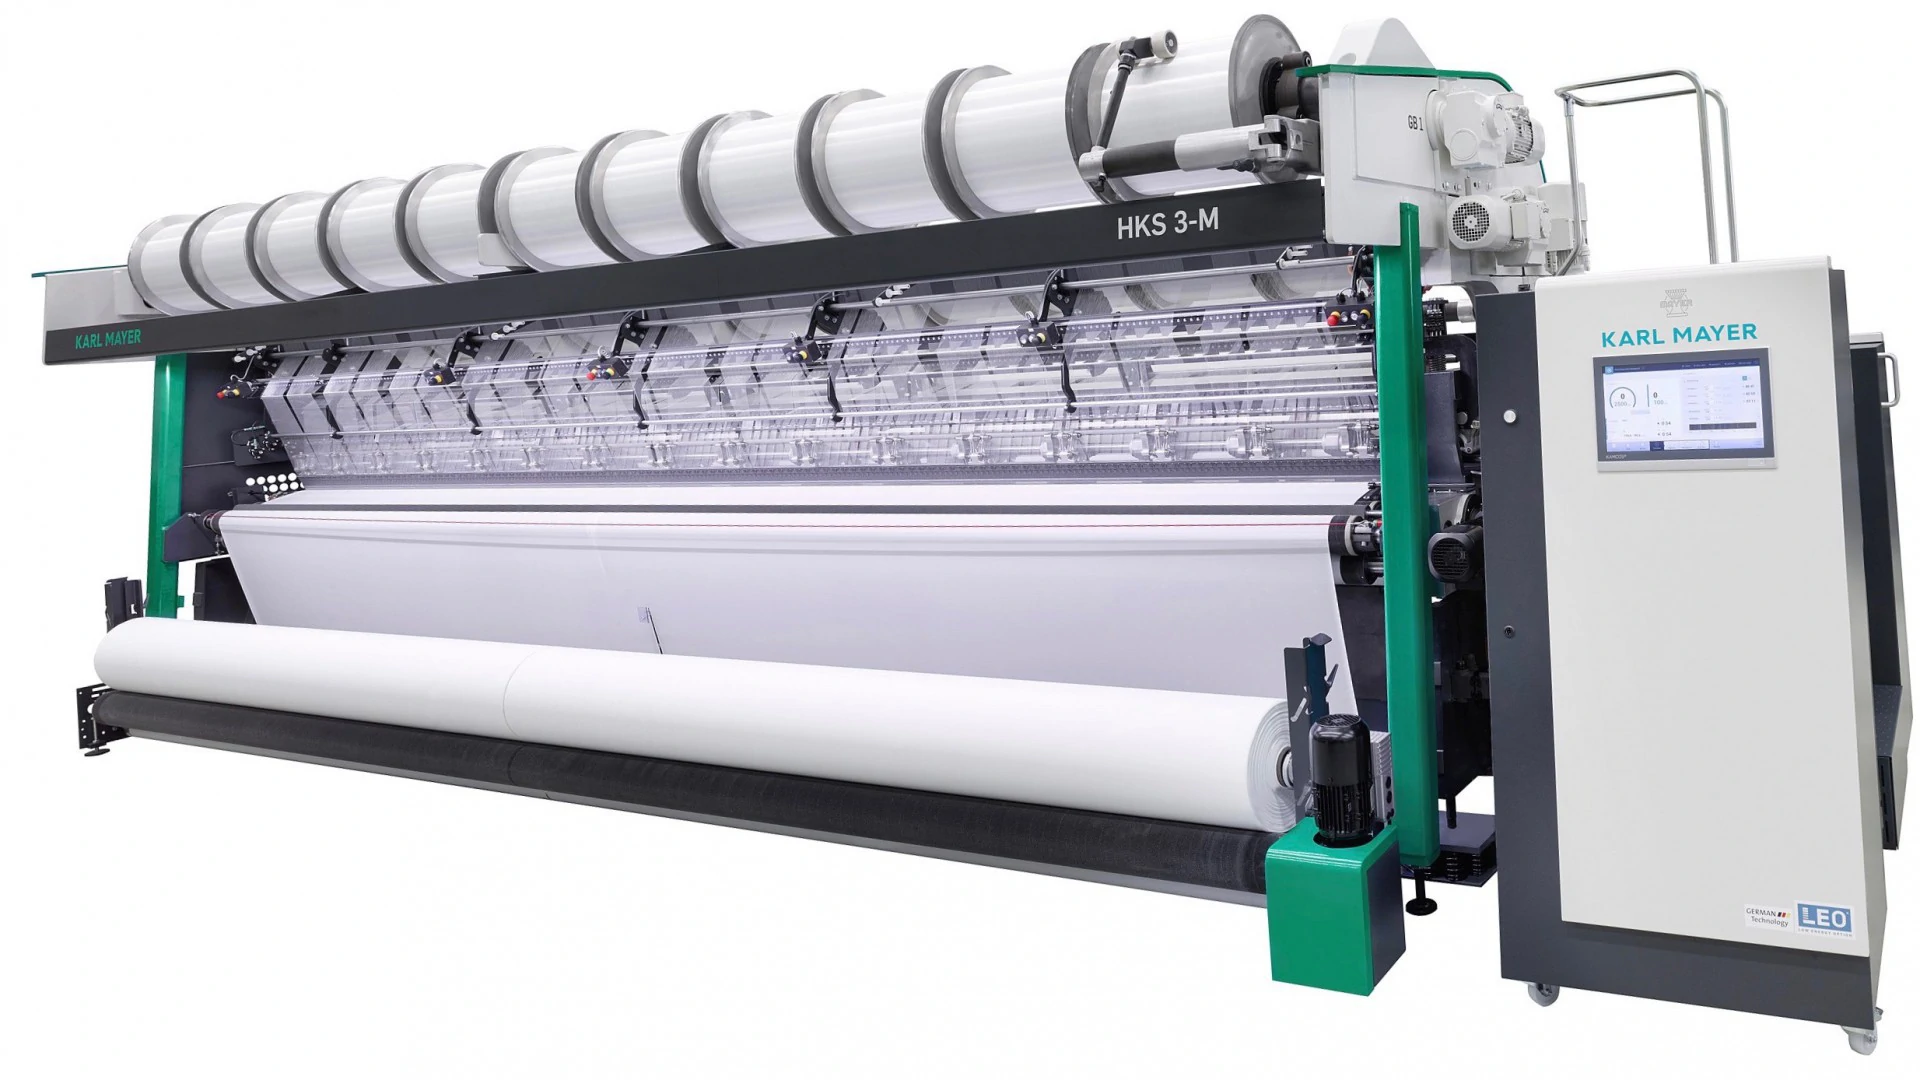 KARL MAYER offers perfect solutions for the fields of warp knitting and flat knitting, technical textiles, warp preparation for weaving and digitalisation.